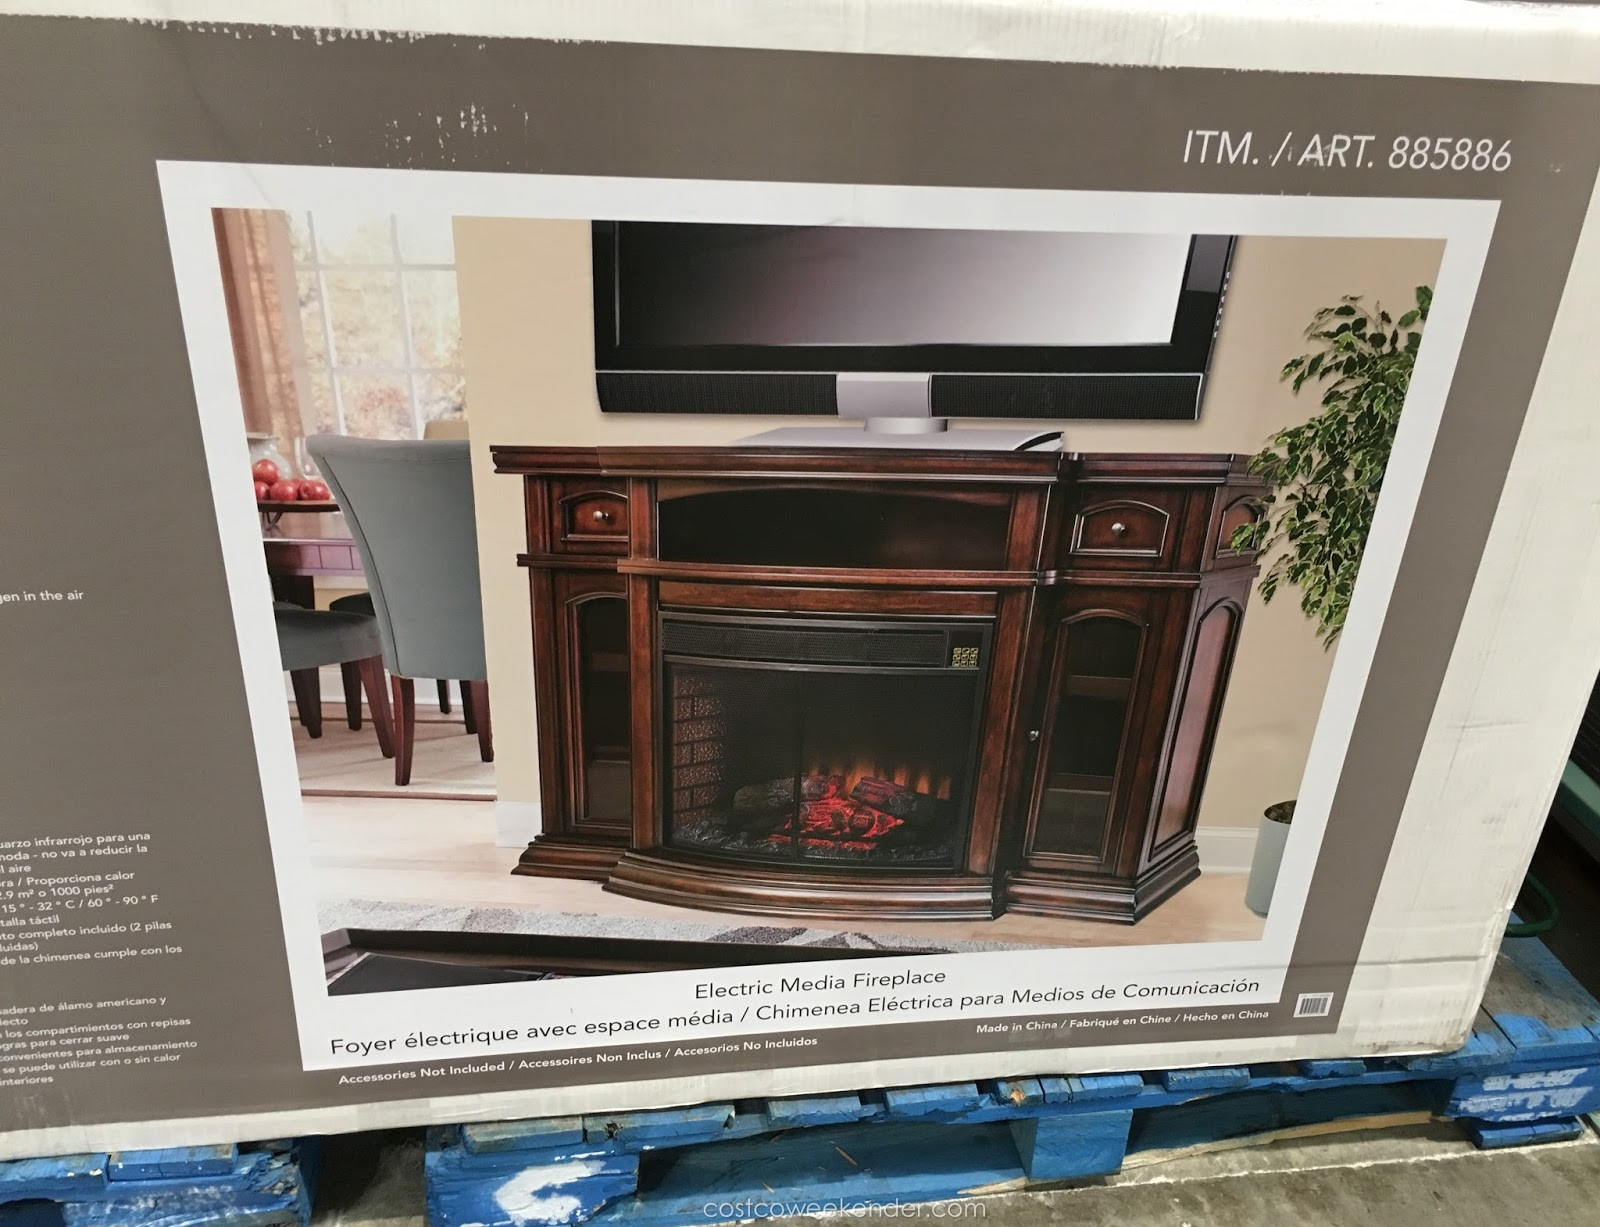 Ember Hearth Electric Fireplace Costco Awesome Ember Hearth Electric Media Fireplace